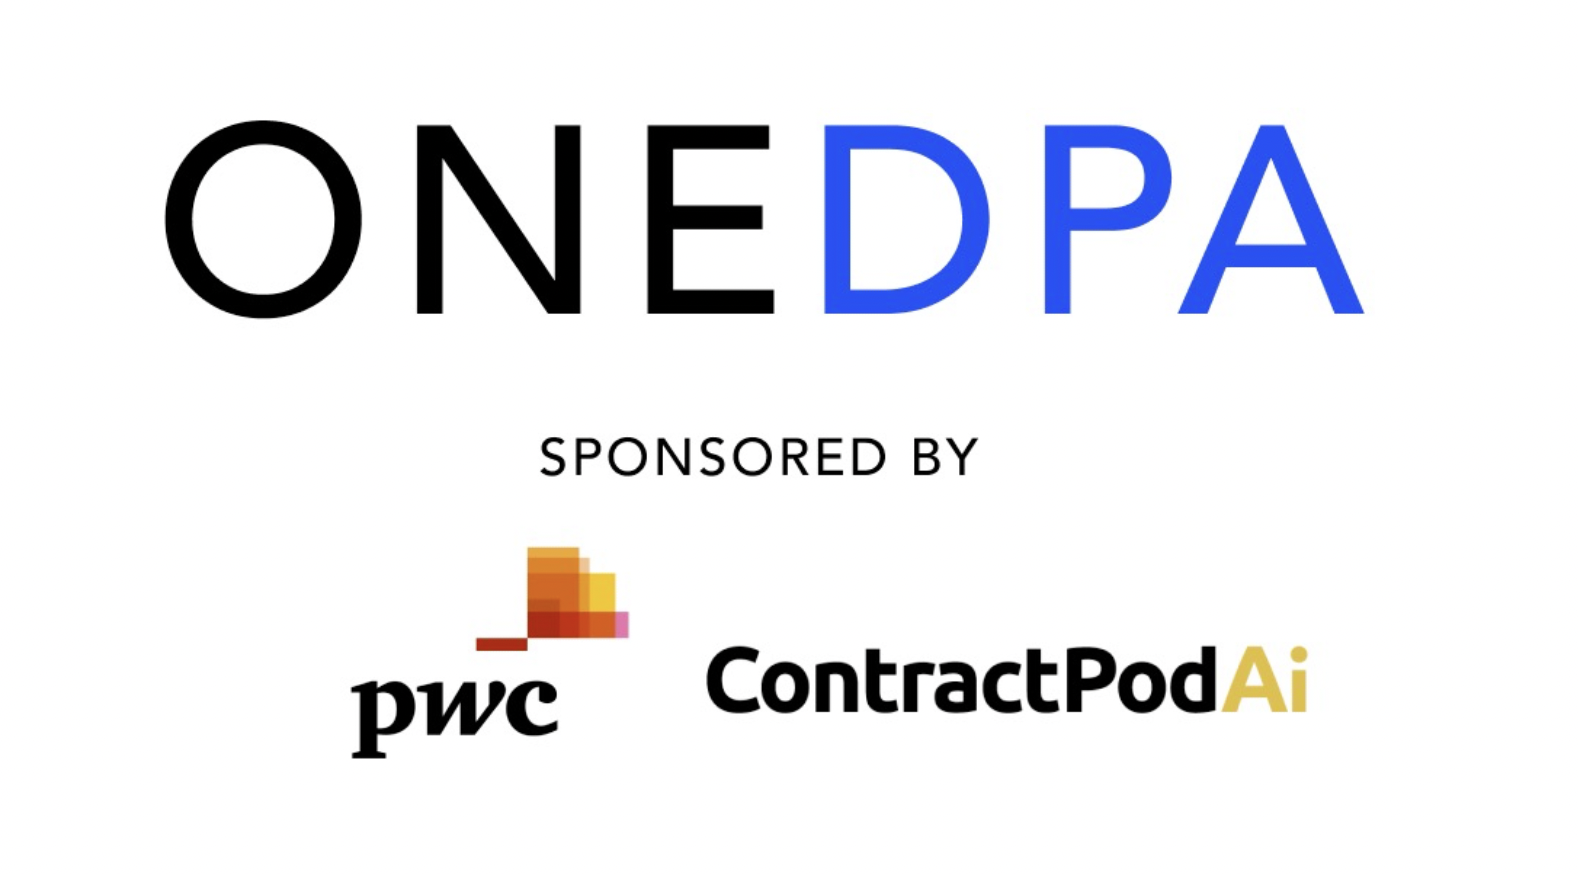 ContractPodAI’s oneDPA Is Now Freely Available